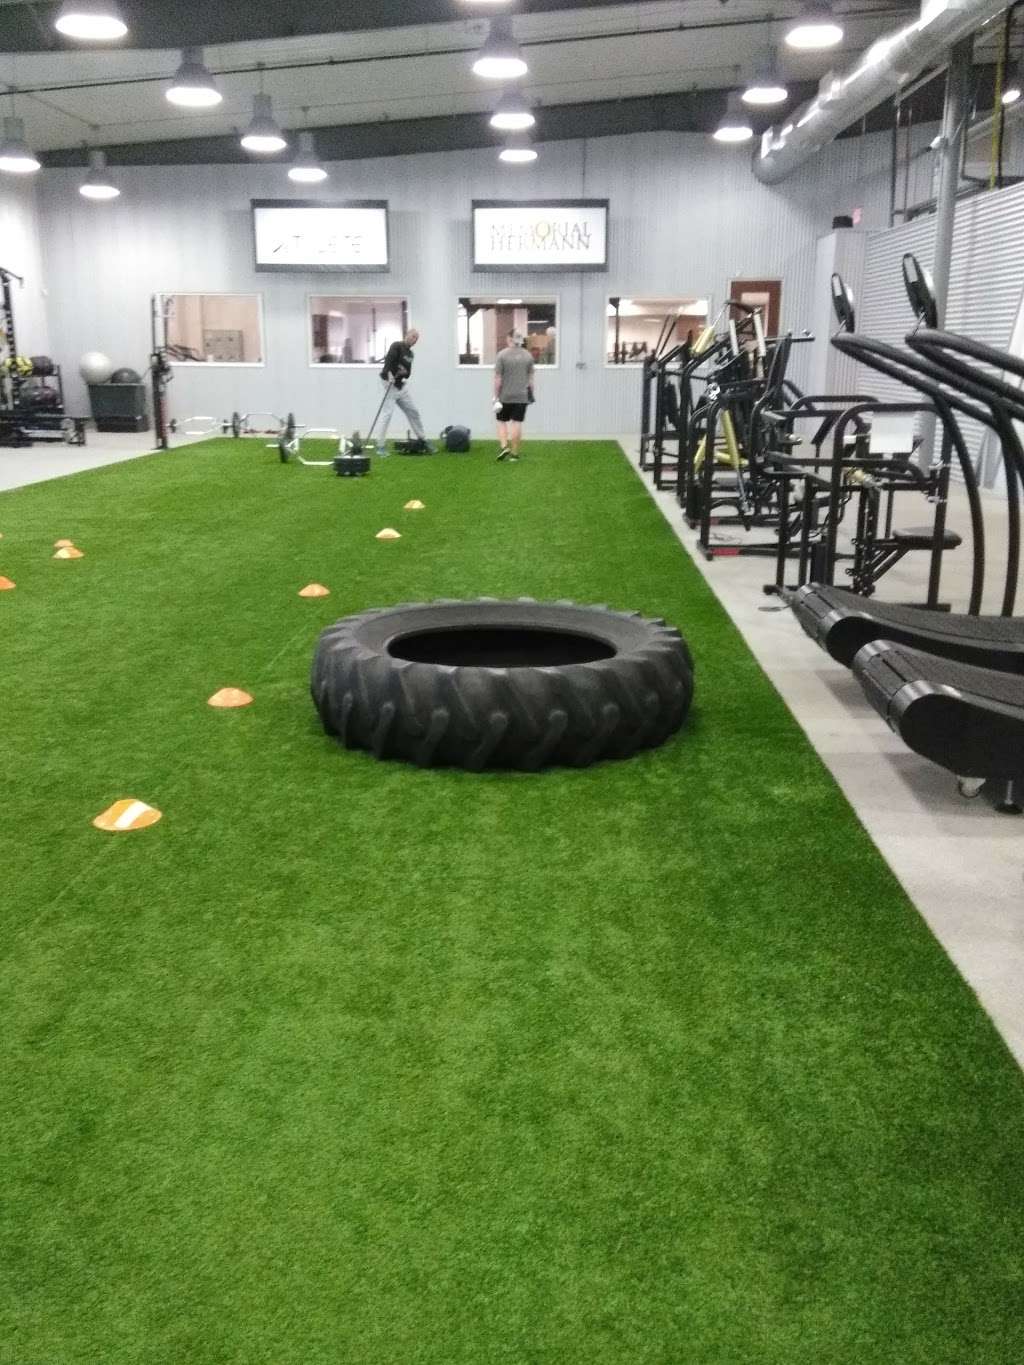 Athlete Training and Health | 19711 Stuebner Airline Rd, Spring, TX 77379 | Phone: (832) 698-9821